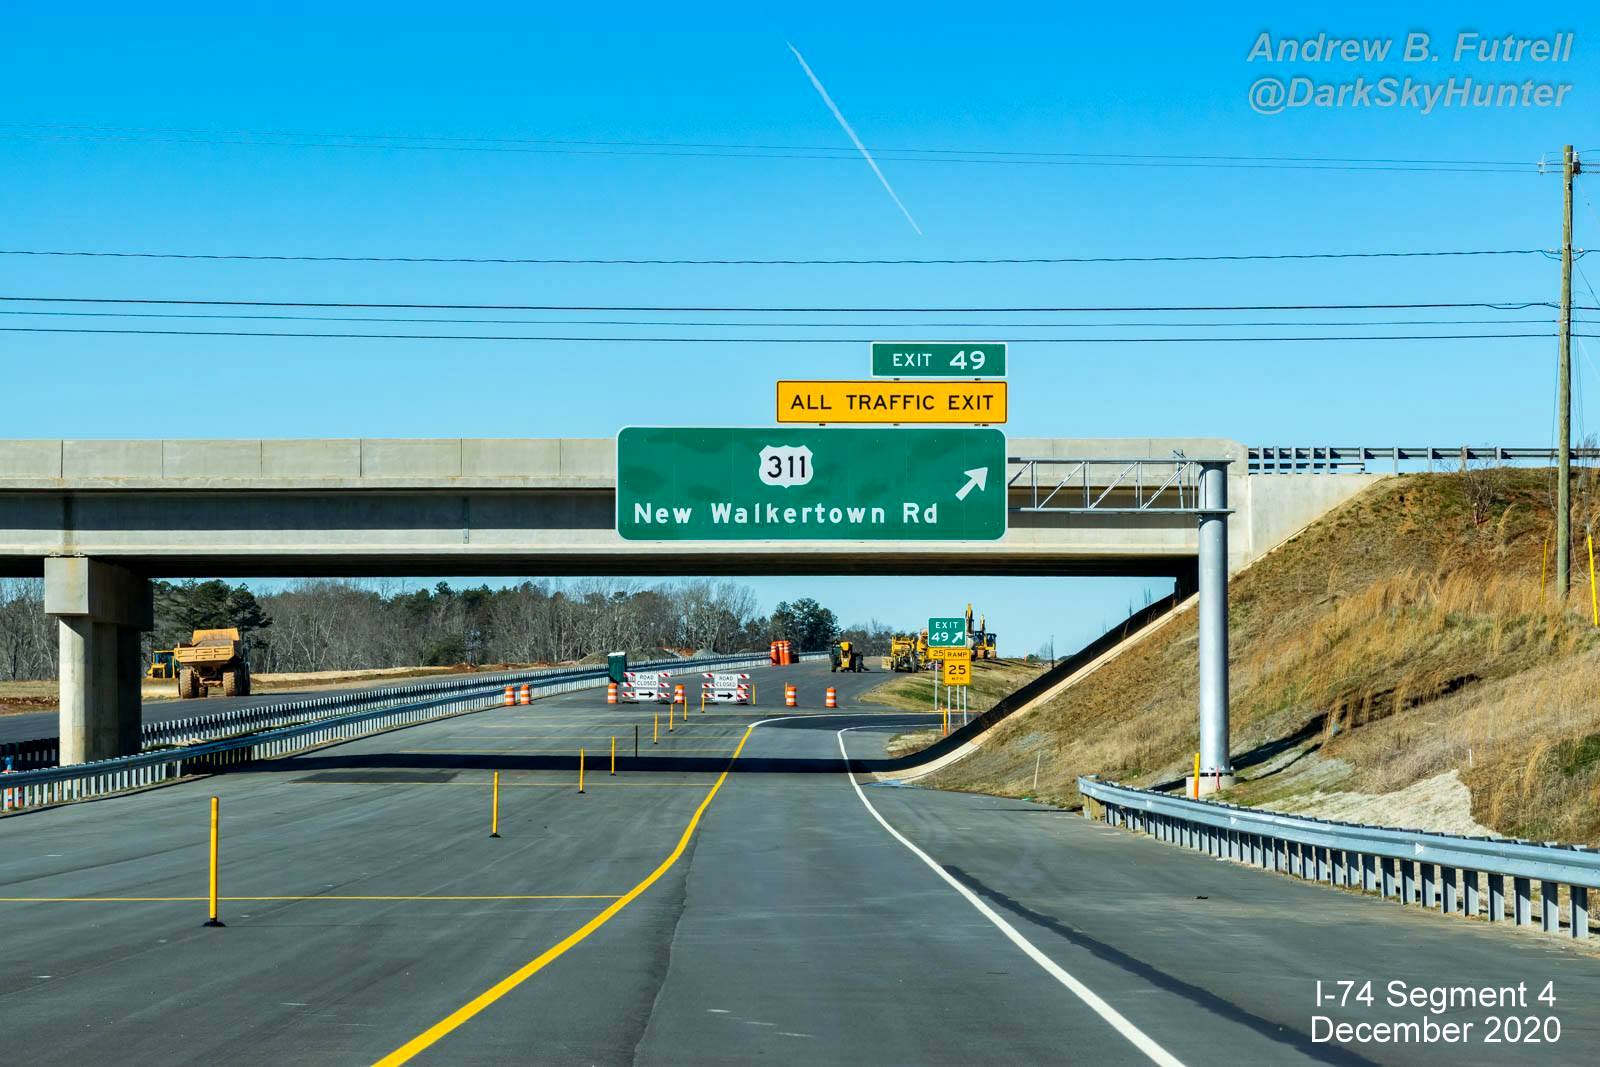 Image of overhead sign at current end of newly opened section of NC 74 (Future I-74) West Winston-Salem Northern 
        Beltway, by Andrew F. Futrell, December 2020